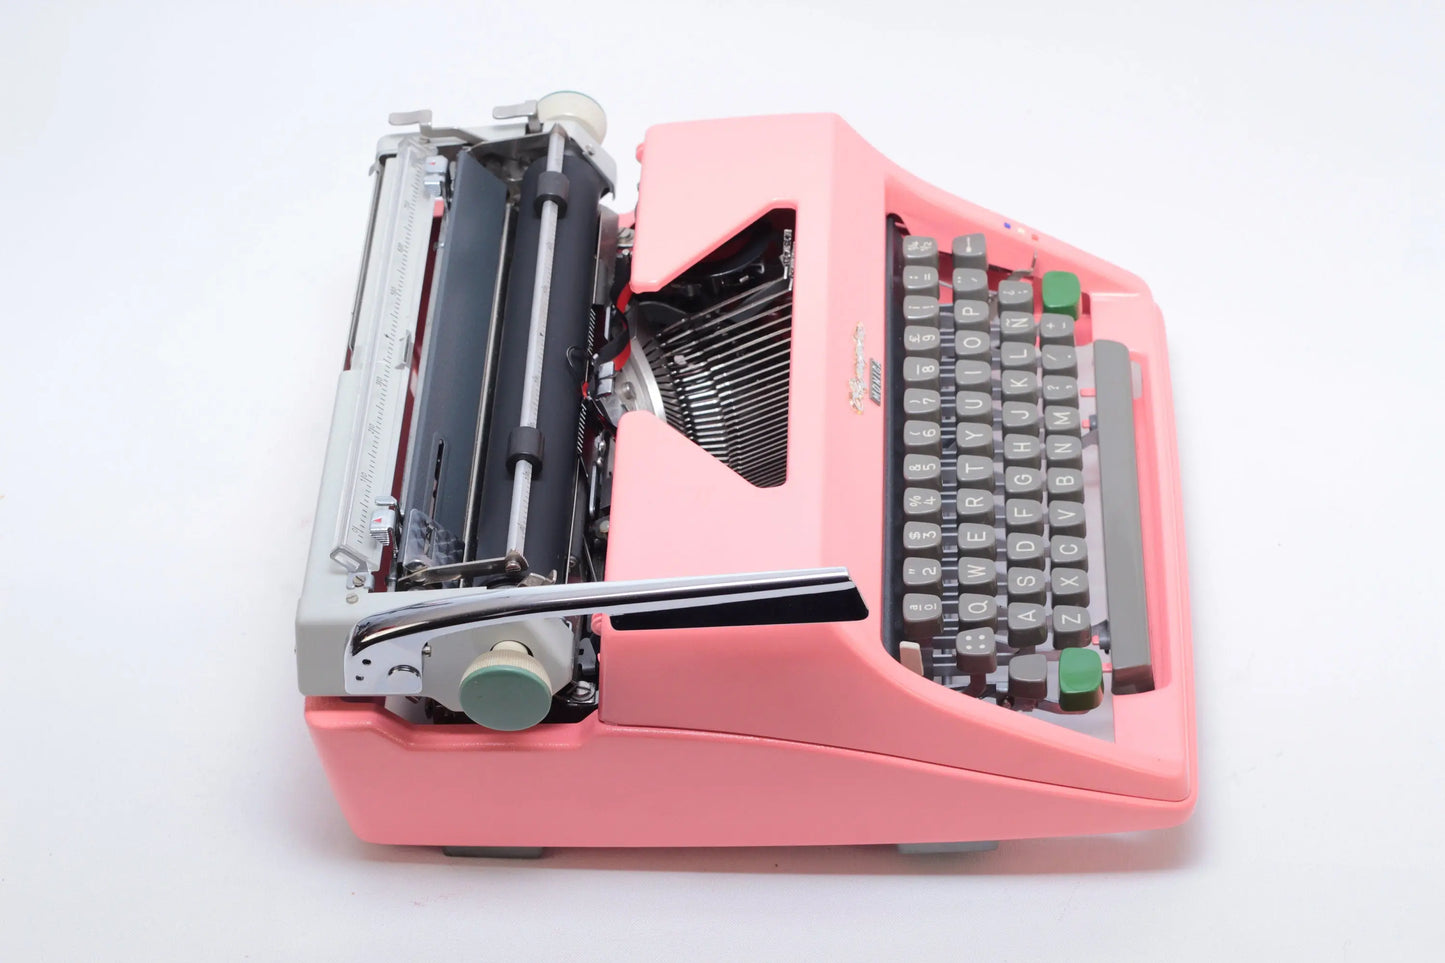 Olympia SM Light Pink Typewriter, Vintage Manual, Perfectly Working , Professionally Serviced by Typewriter.Company - ElGranero Typewriter.Company